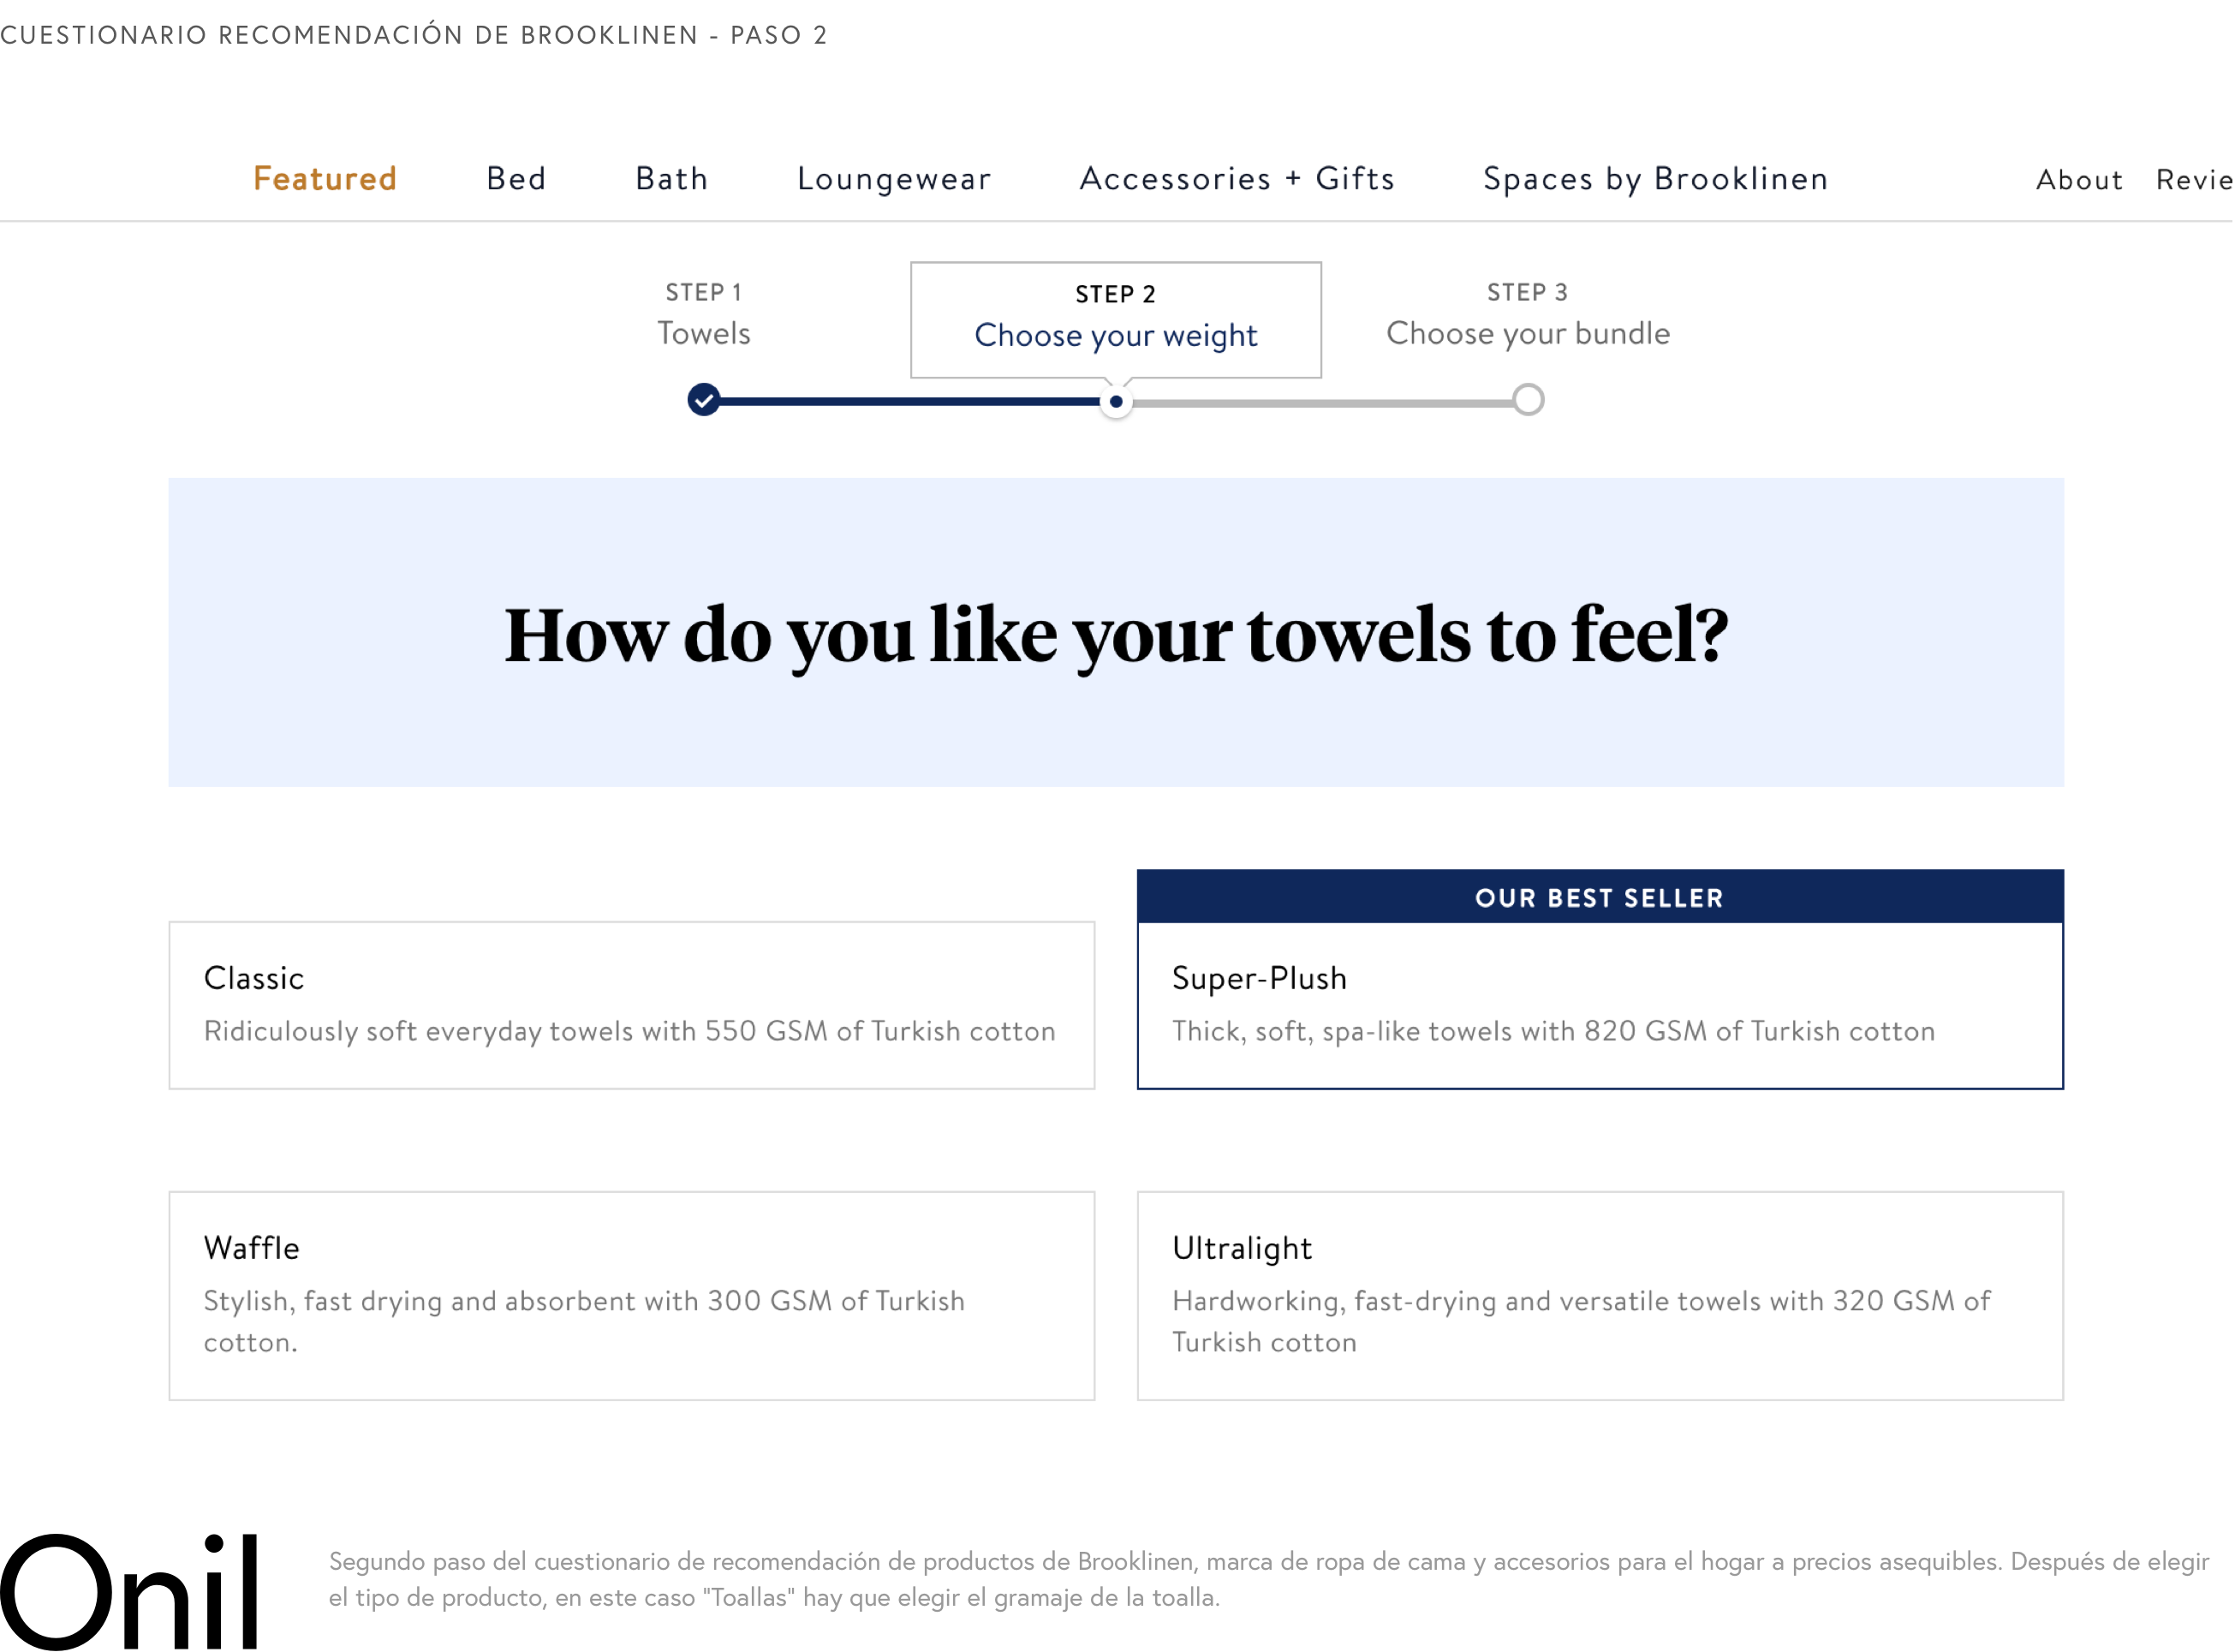 Brooklinen Recommendation Questionnaire, Step 2 - Second step of the Brooklinen Product Recommendation Questionnaire. After choosing the type of product, in this case "Towels" you have to choose the weight of the towel.